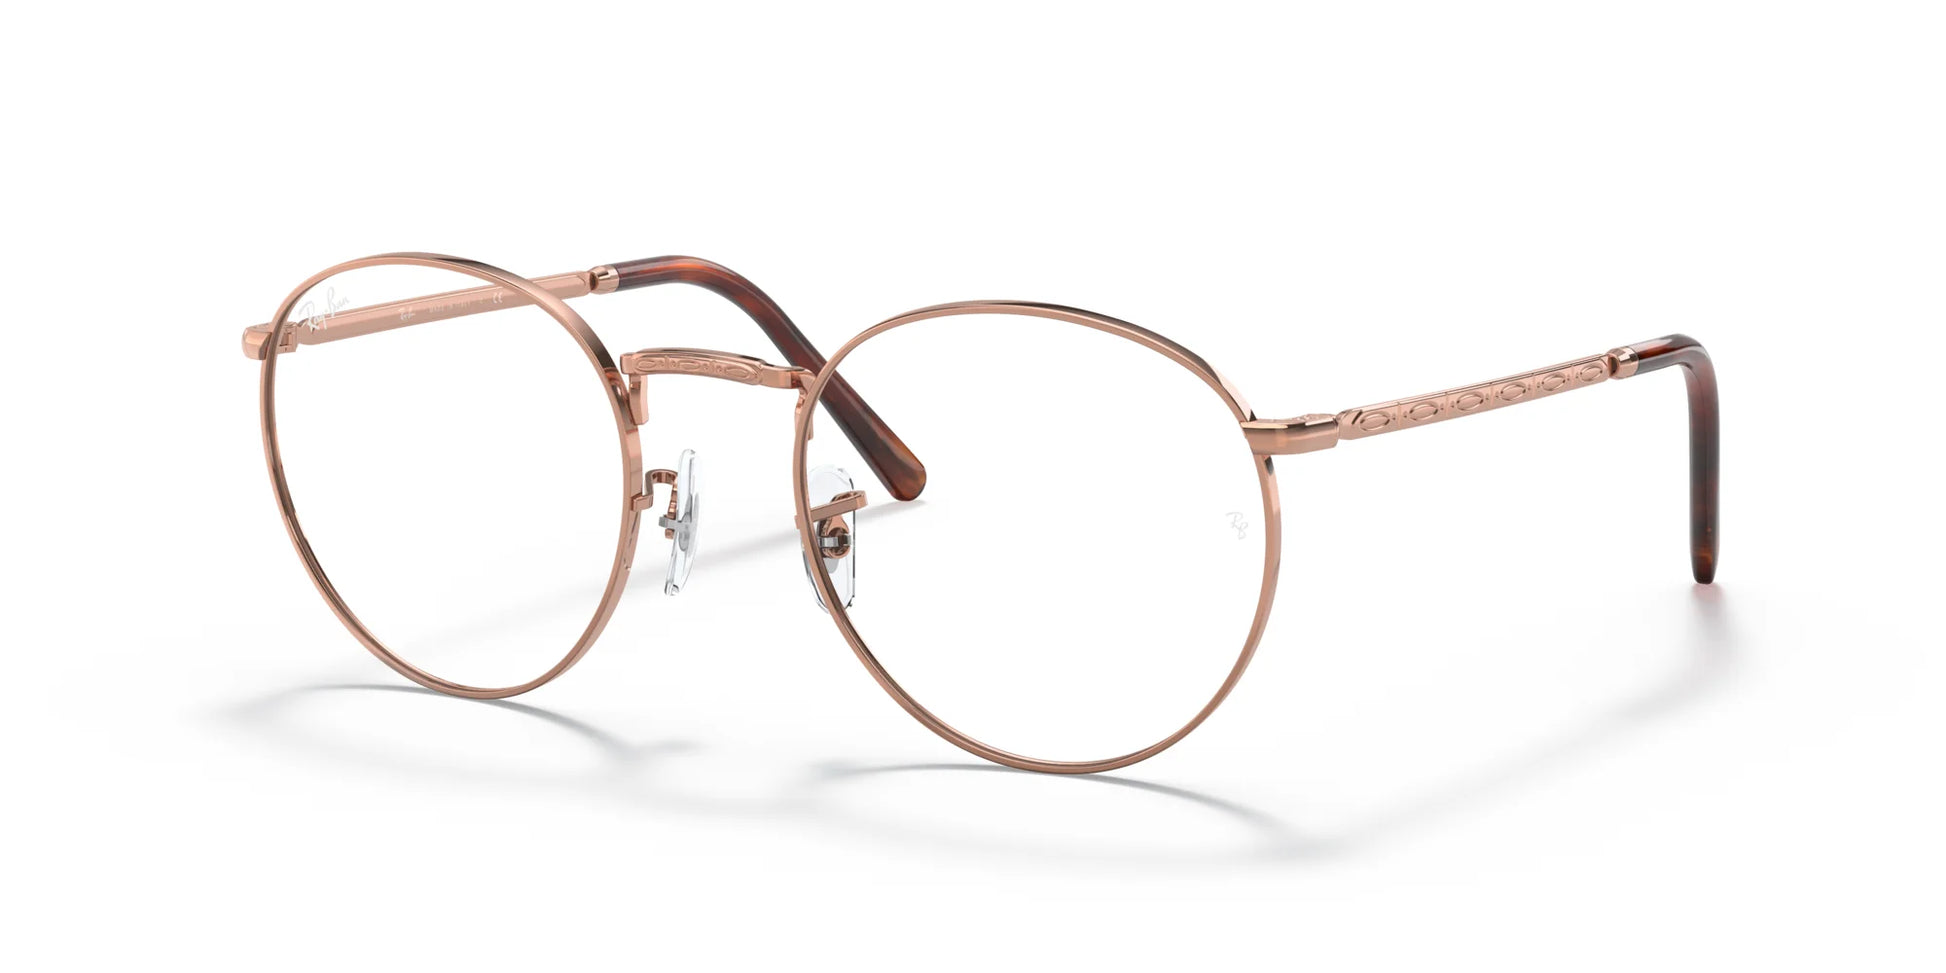 Ray-Ban NEW ROUND RX3637V Eyeglasses Rose Gold / Clear